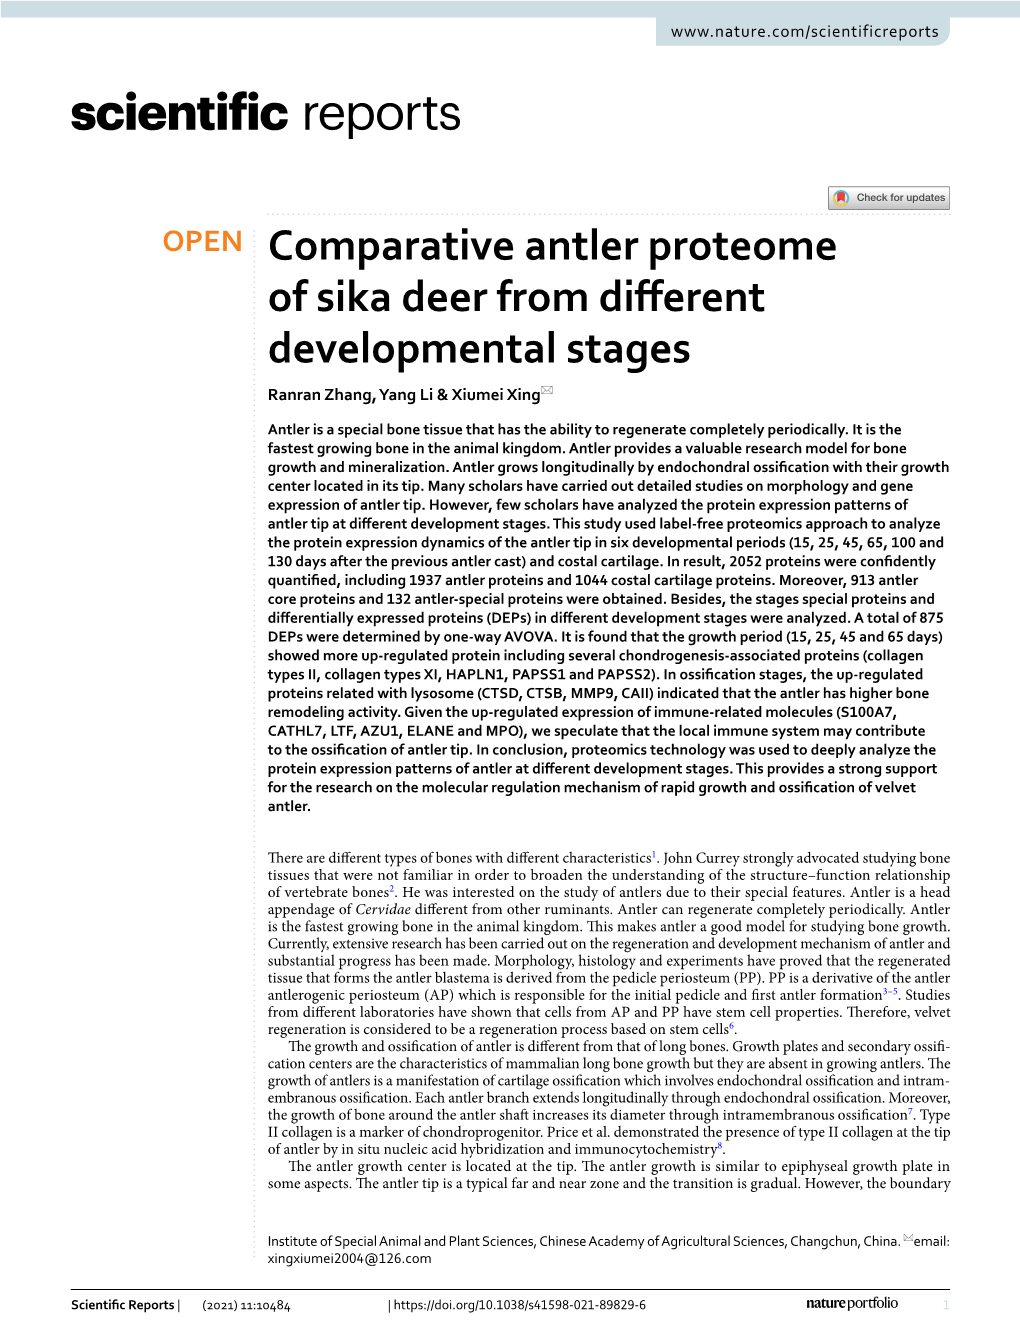 Comparative Antler Proteome of Sika Deer from Different Developmental